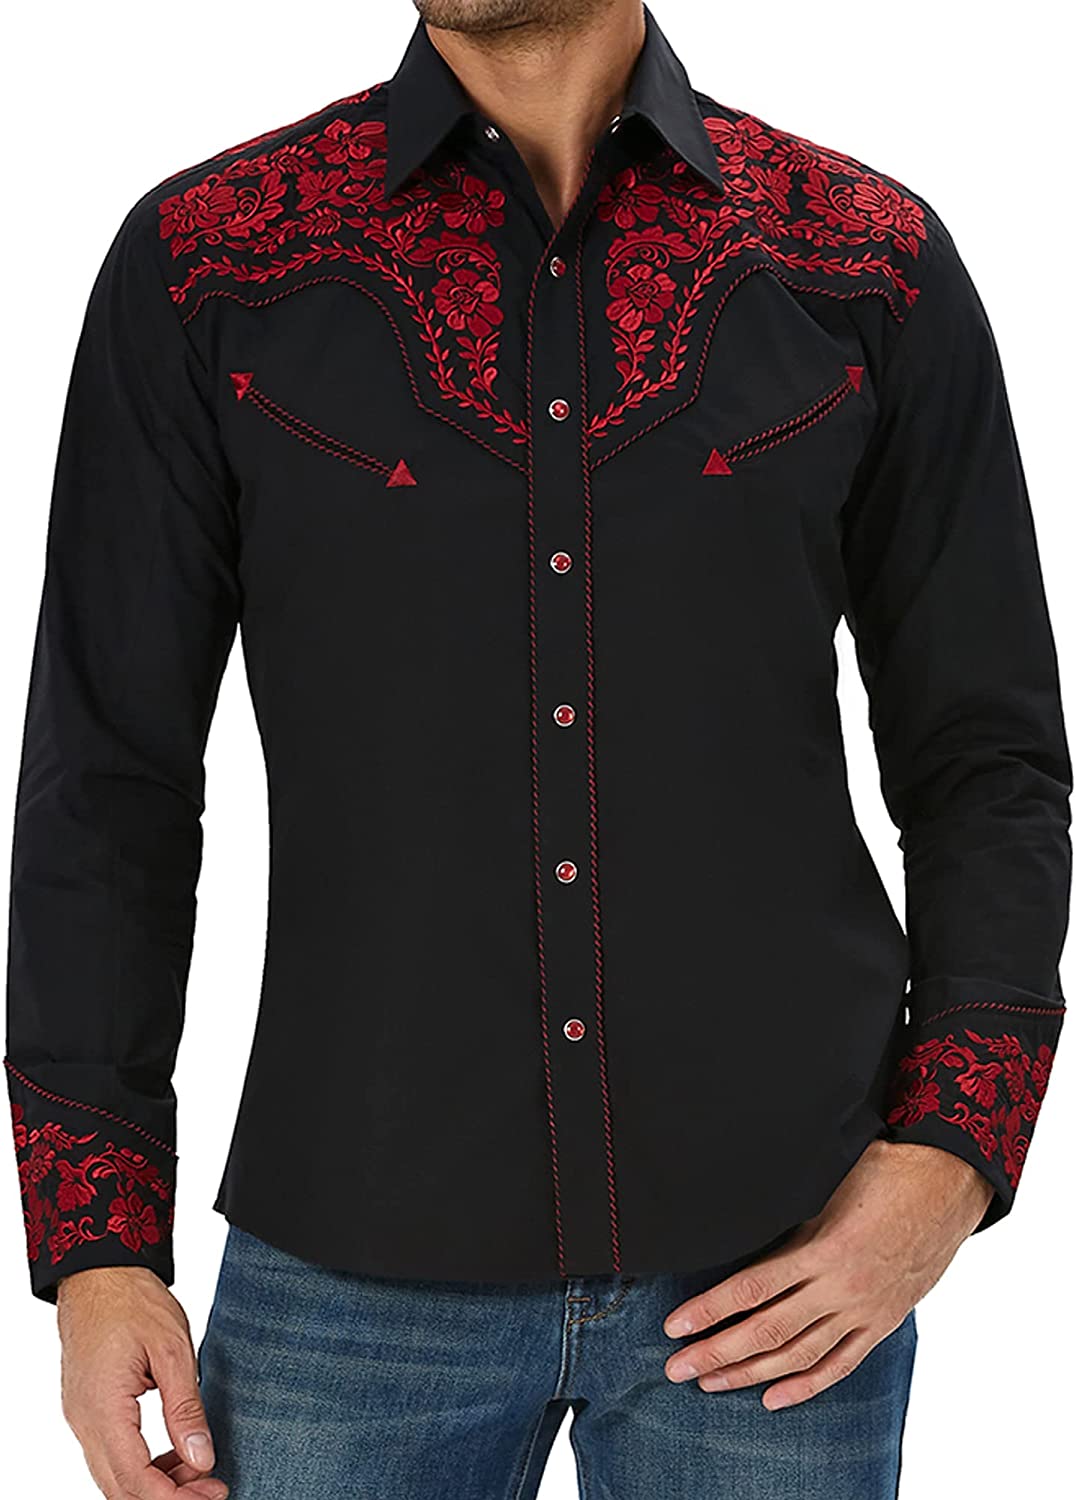 SALVAJE OESTE Embroidered Western Cowboy Shirts for Men Snap